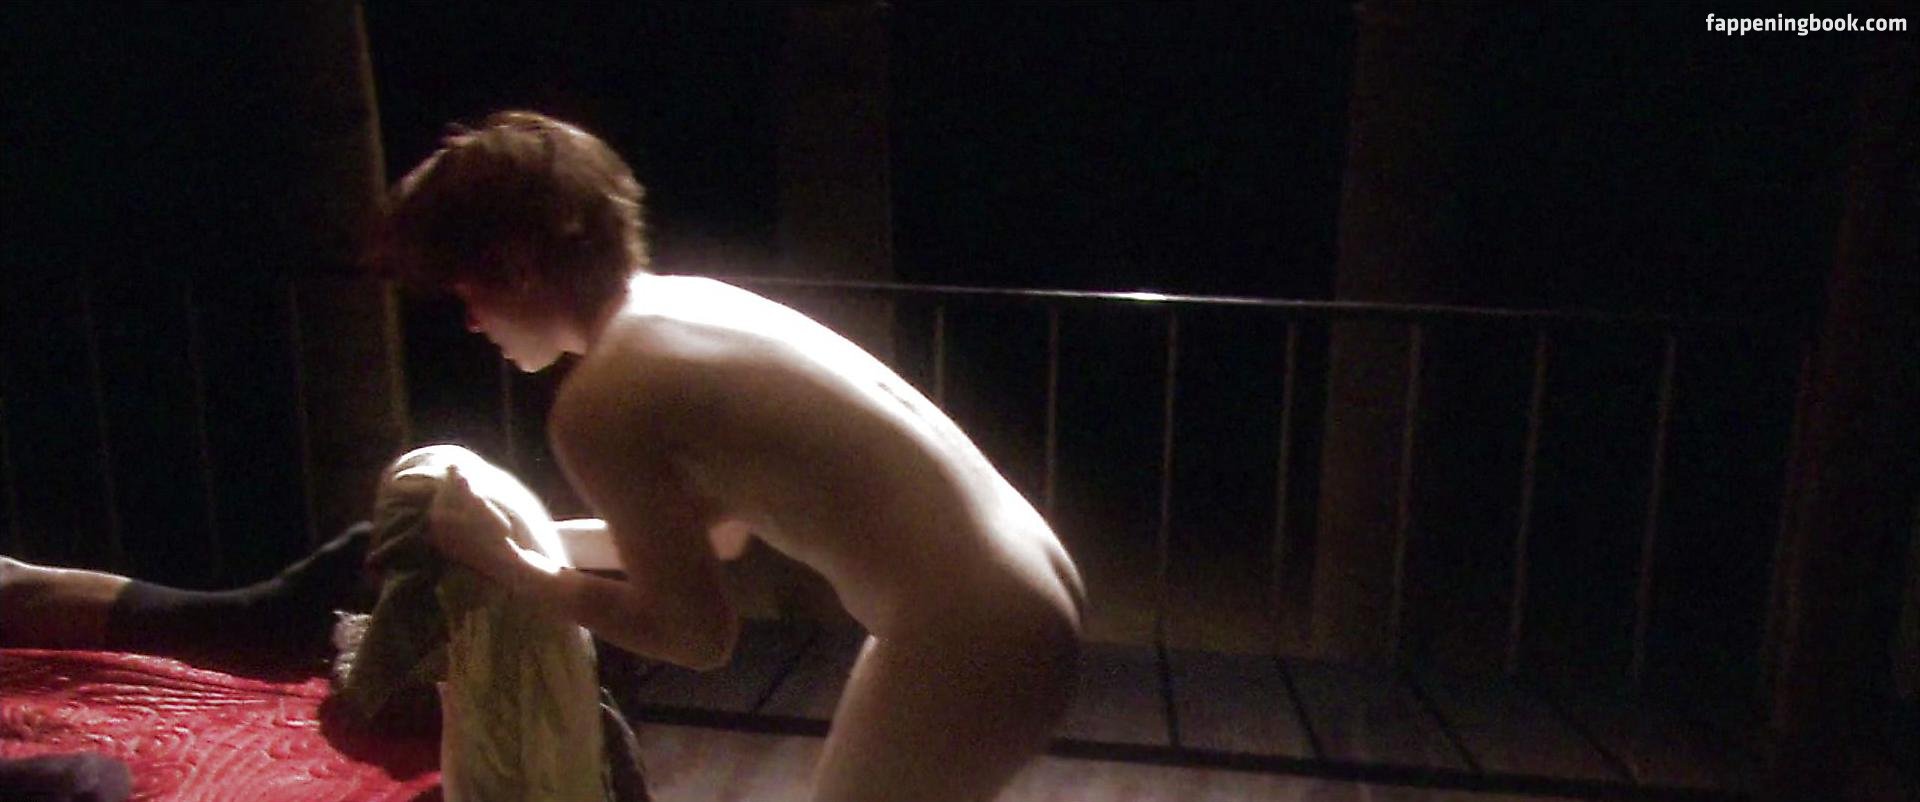 Bryce Dallas Howard Nude, The Fappening - Photo #91772 - FappeningBook.